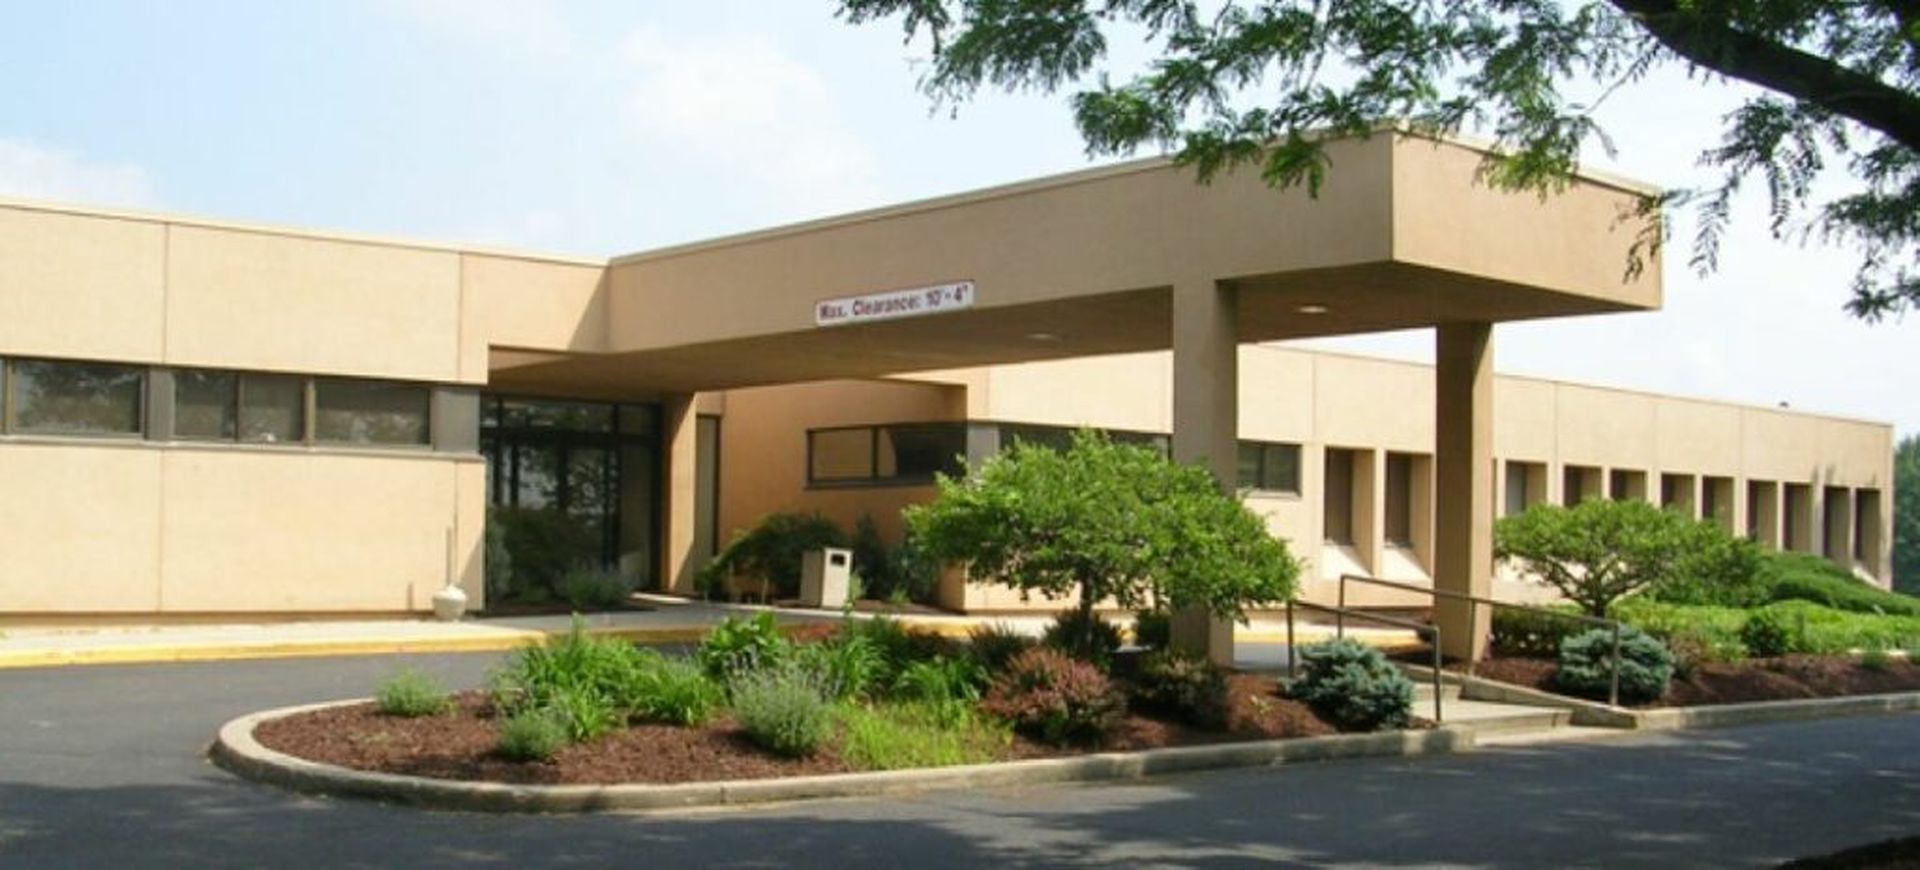 The Danbury, Conn., office of Northeast Radiology. A breach lawsuit against the radiology specialist and its vendor Alliance HealthCare was dismissed due to a lack of evidence detailing concrete harm. (Credit: Northeast Radiology)